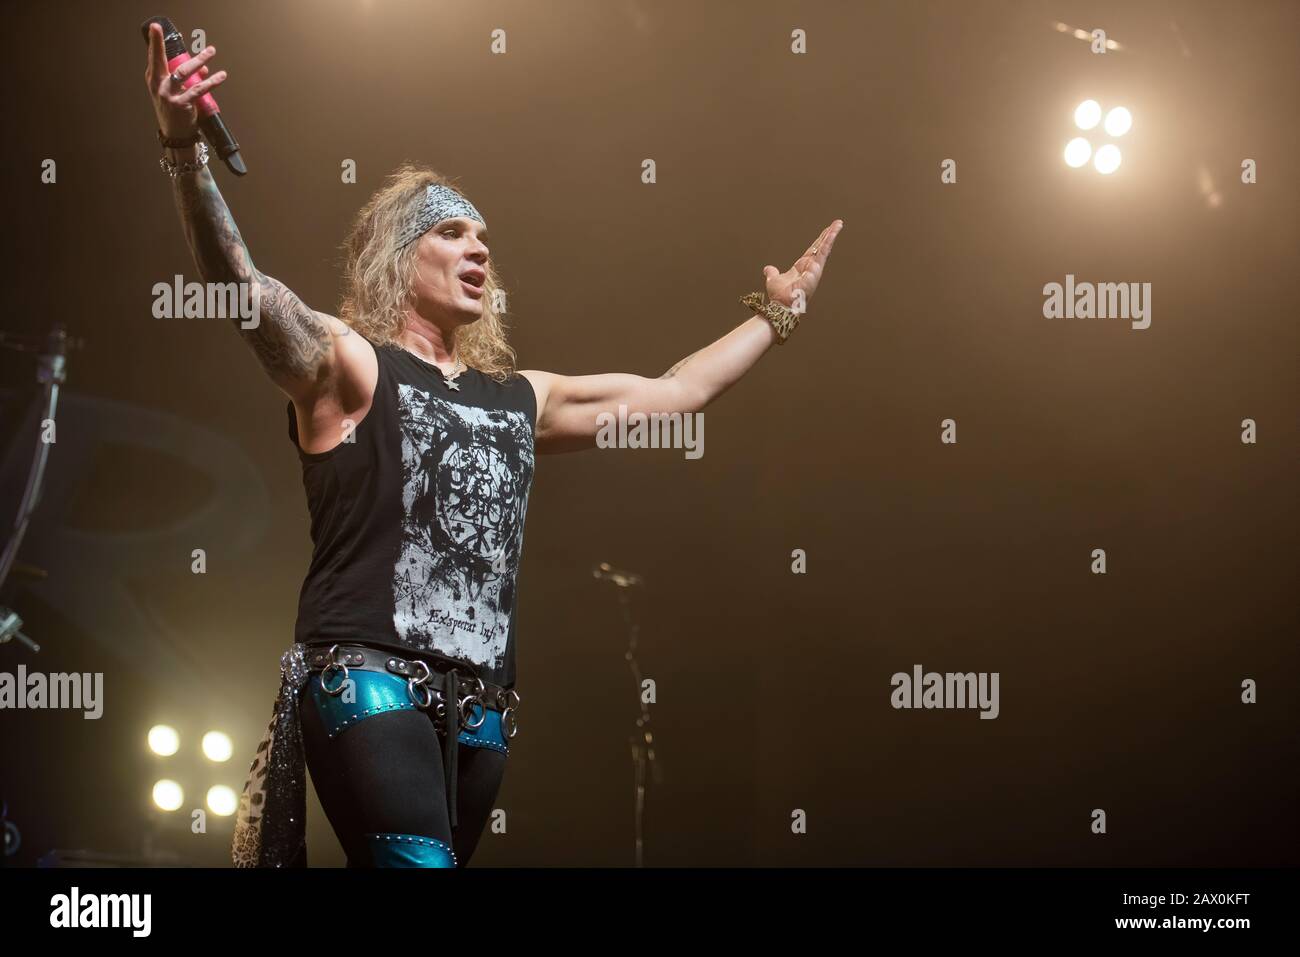 Manchester, UK. 09th February 20120. Michael Starr,  Satchel, Lexxi Foxx and Stix Zadinia of the band Steel Panther perform at the O2 Victoria Warehouse, Manchester on their  “ Heavy Metal Rules “ UK tour, Manchester 2019-02-09 . Credit:  Gary Mather/Alamy Live News Stock Photo